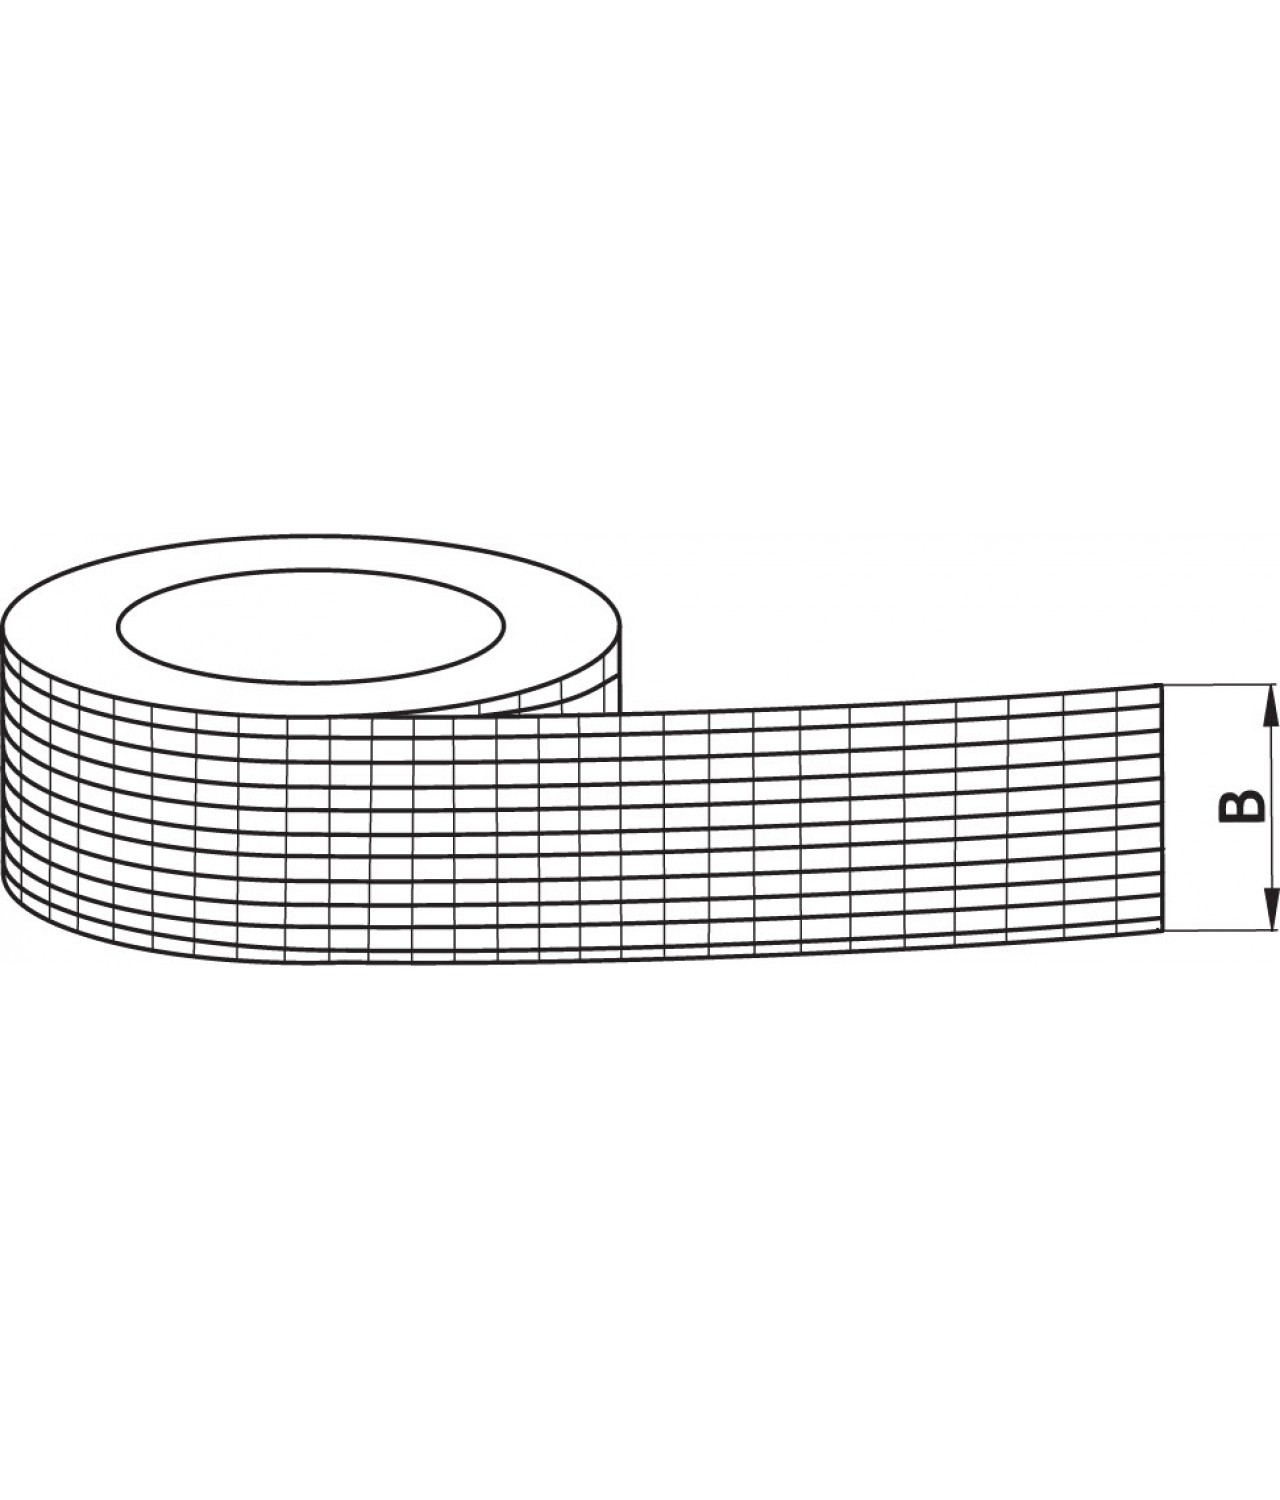 Adhesive aluminum foil tape reinforced for ducts AS256, 4.8 cm x 45 m, -40 - +120 °C - drawing